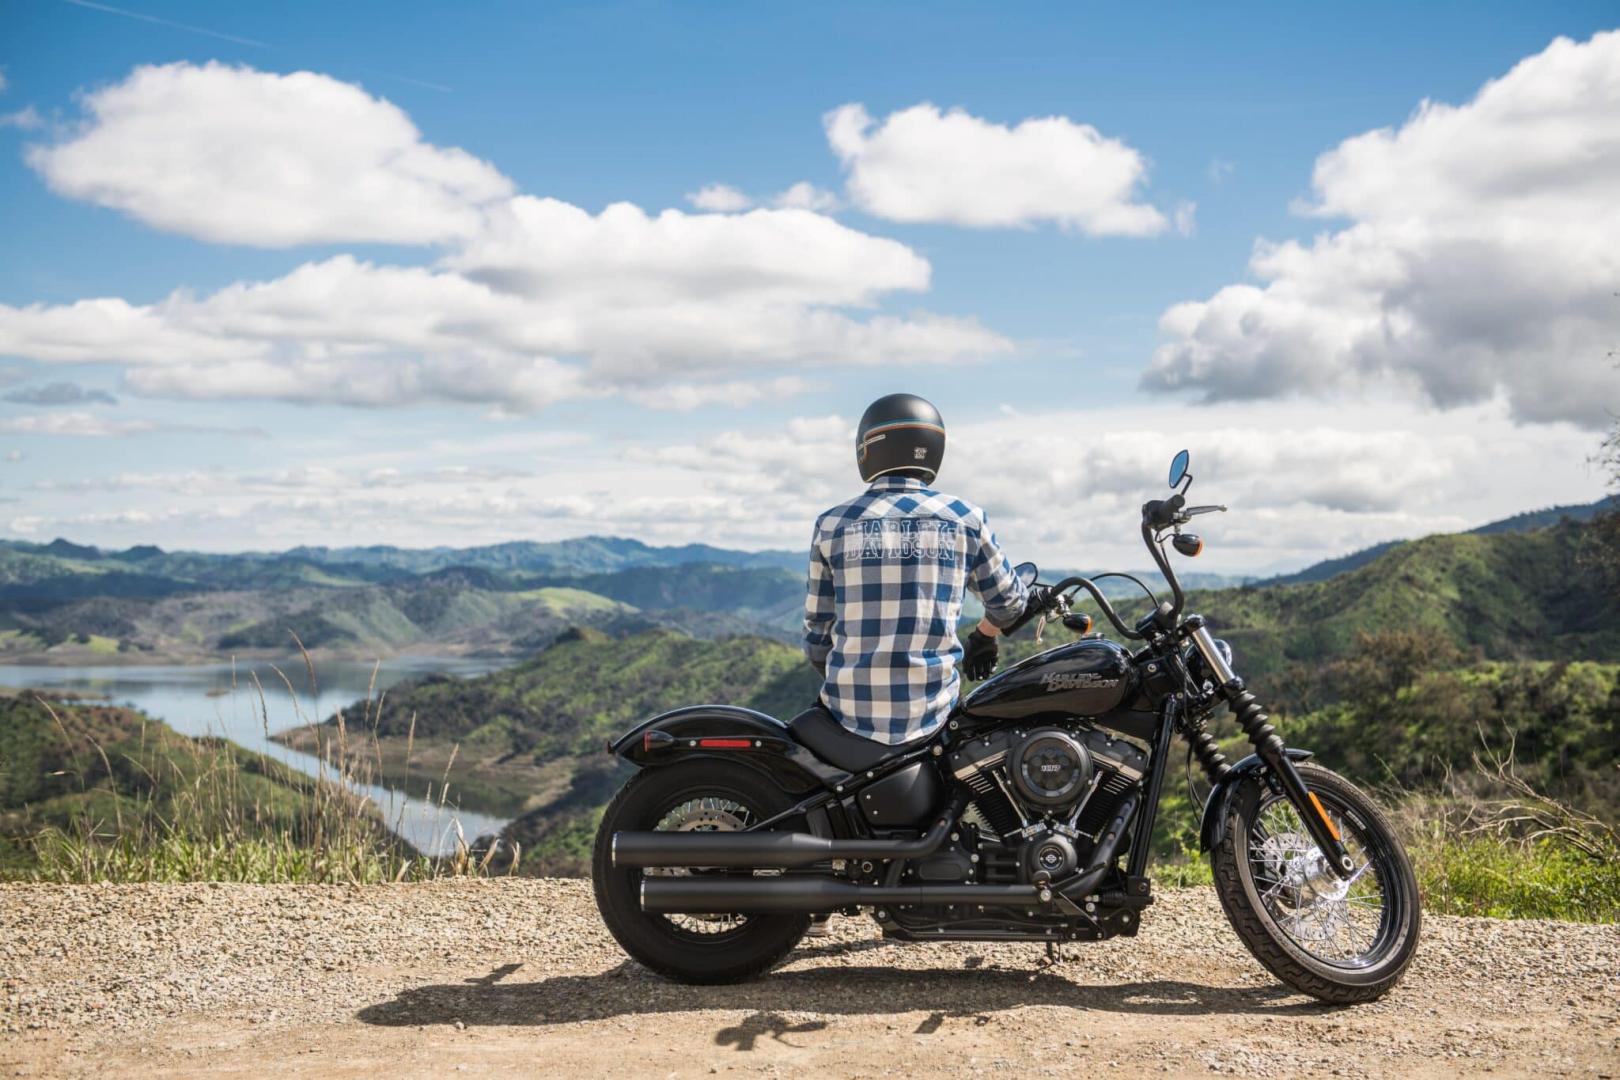 Man on a motorcycle looking out onto a scenic landscape.